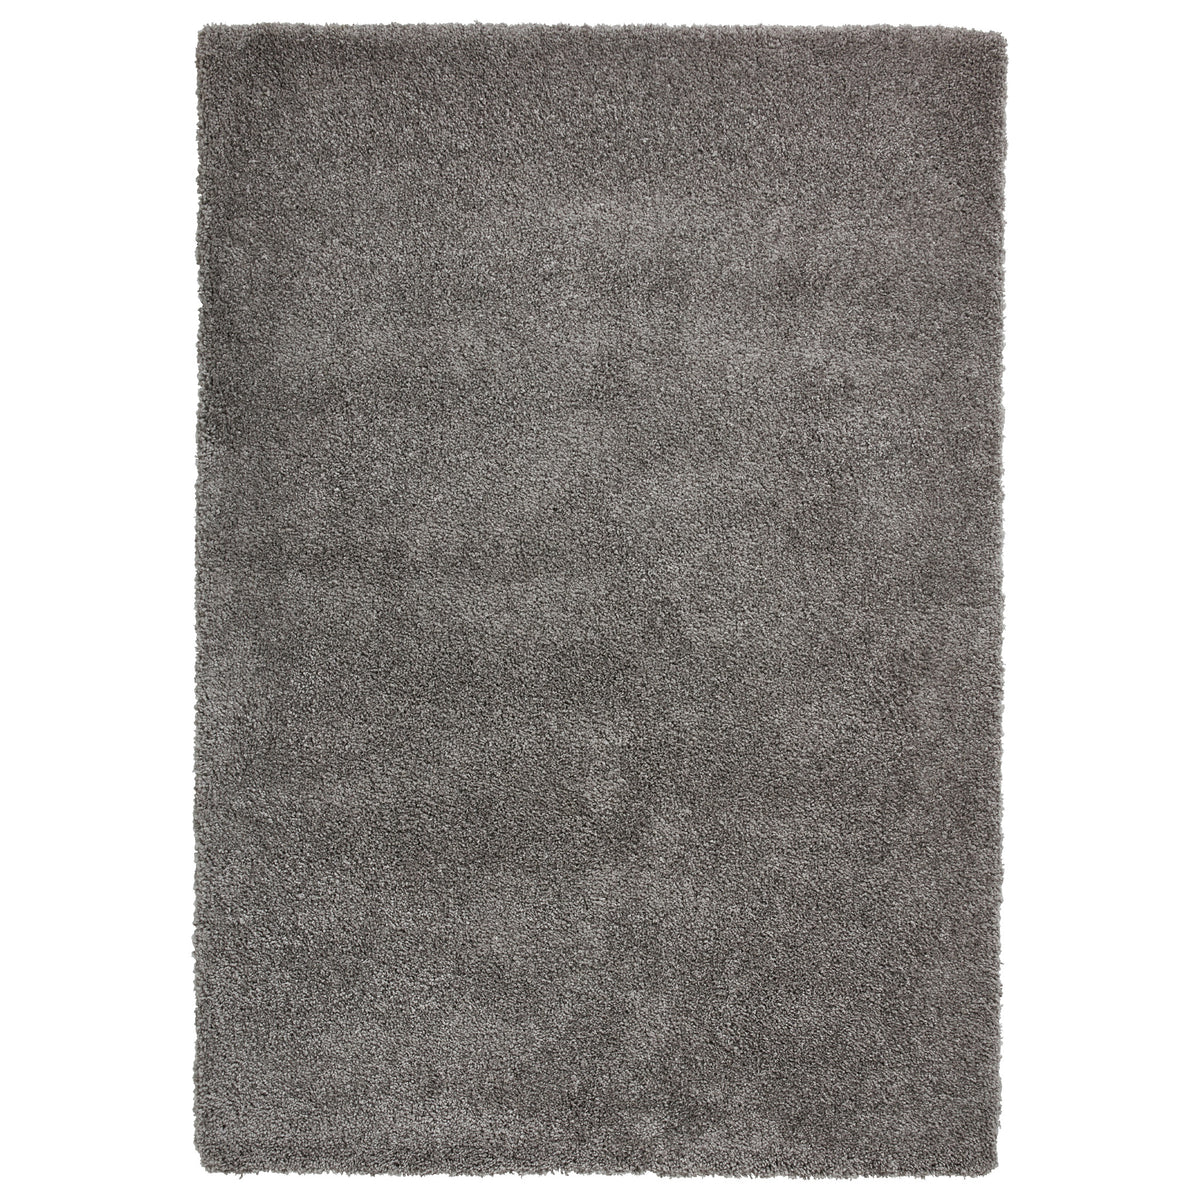 Roswell Pebble Grey Stain Resistant Shaggy Rug from Roseland Furniture